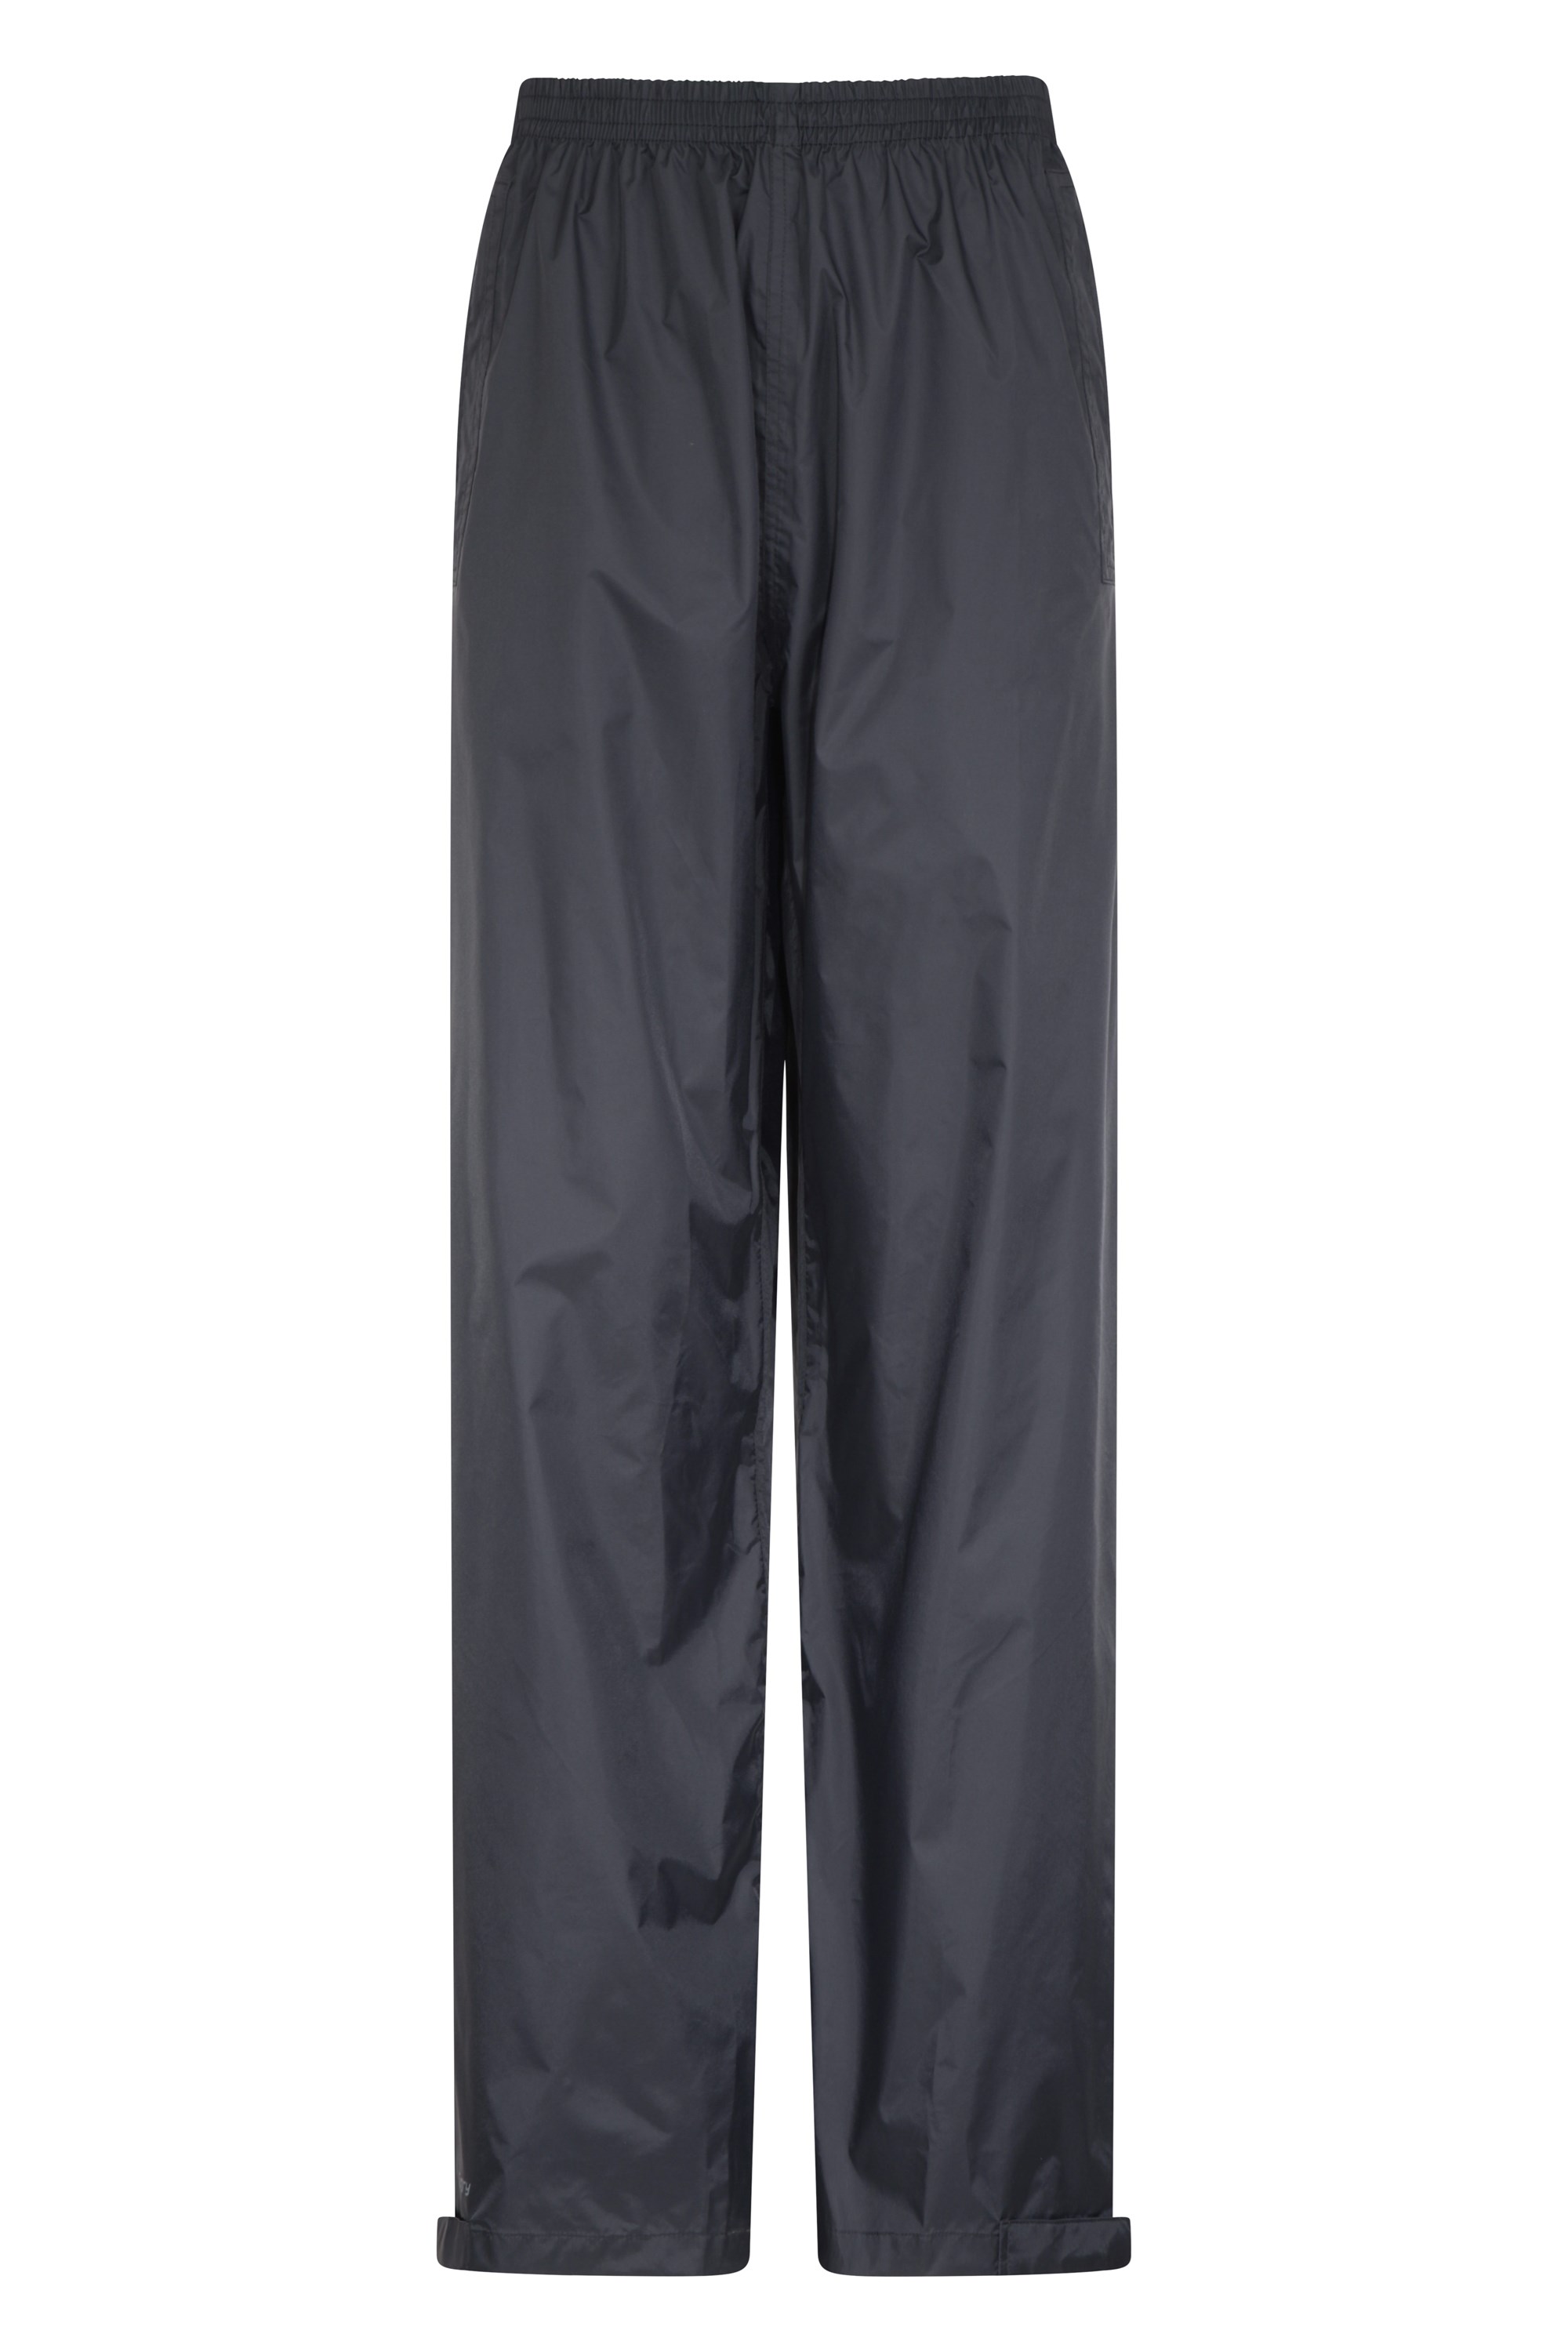 Mountain Warehouse Downpour Mens Waterproof Overtrousers Ripstop Breathable Rain Pants 